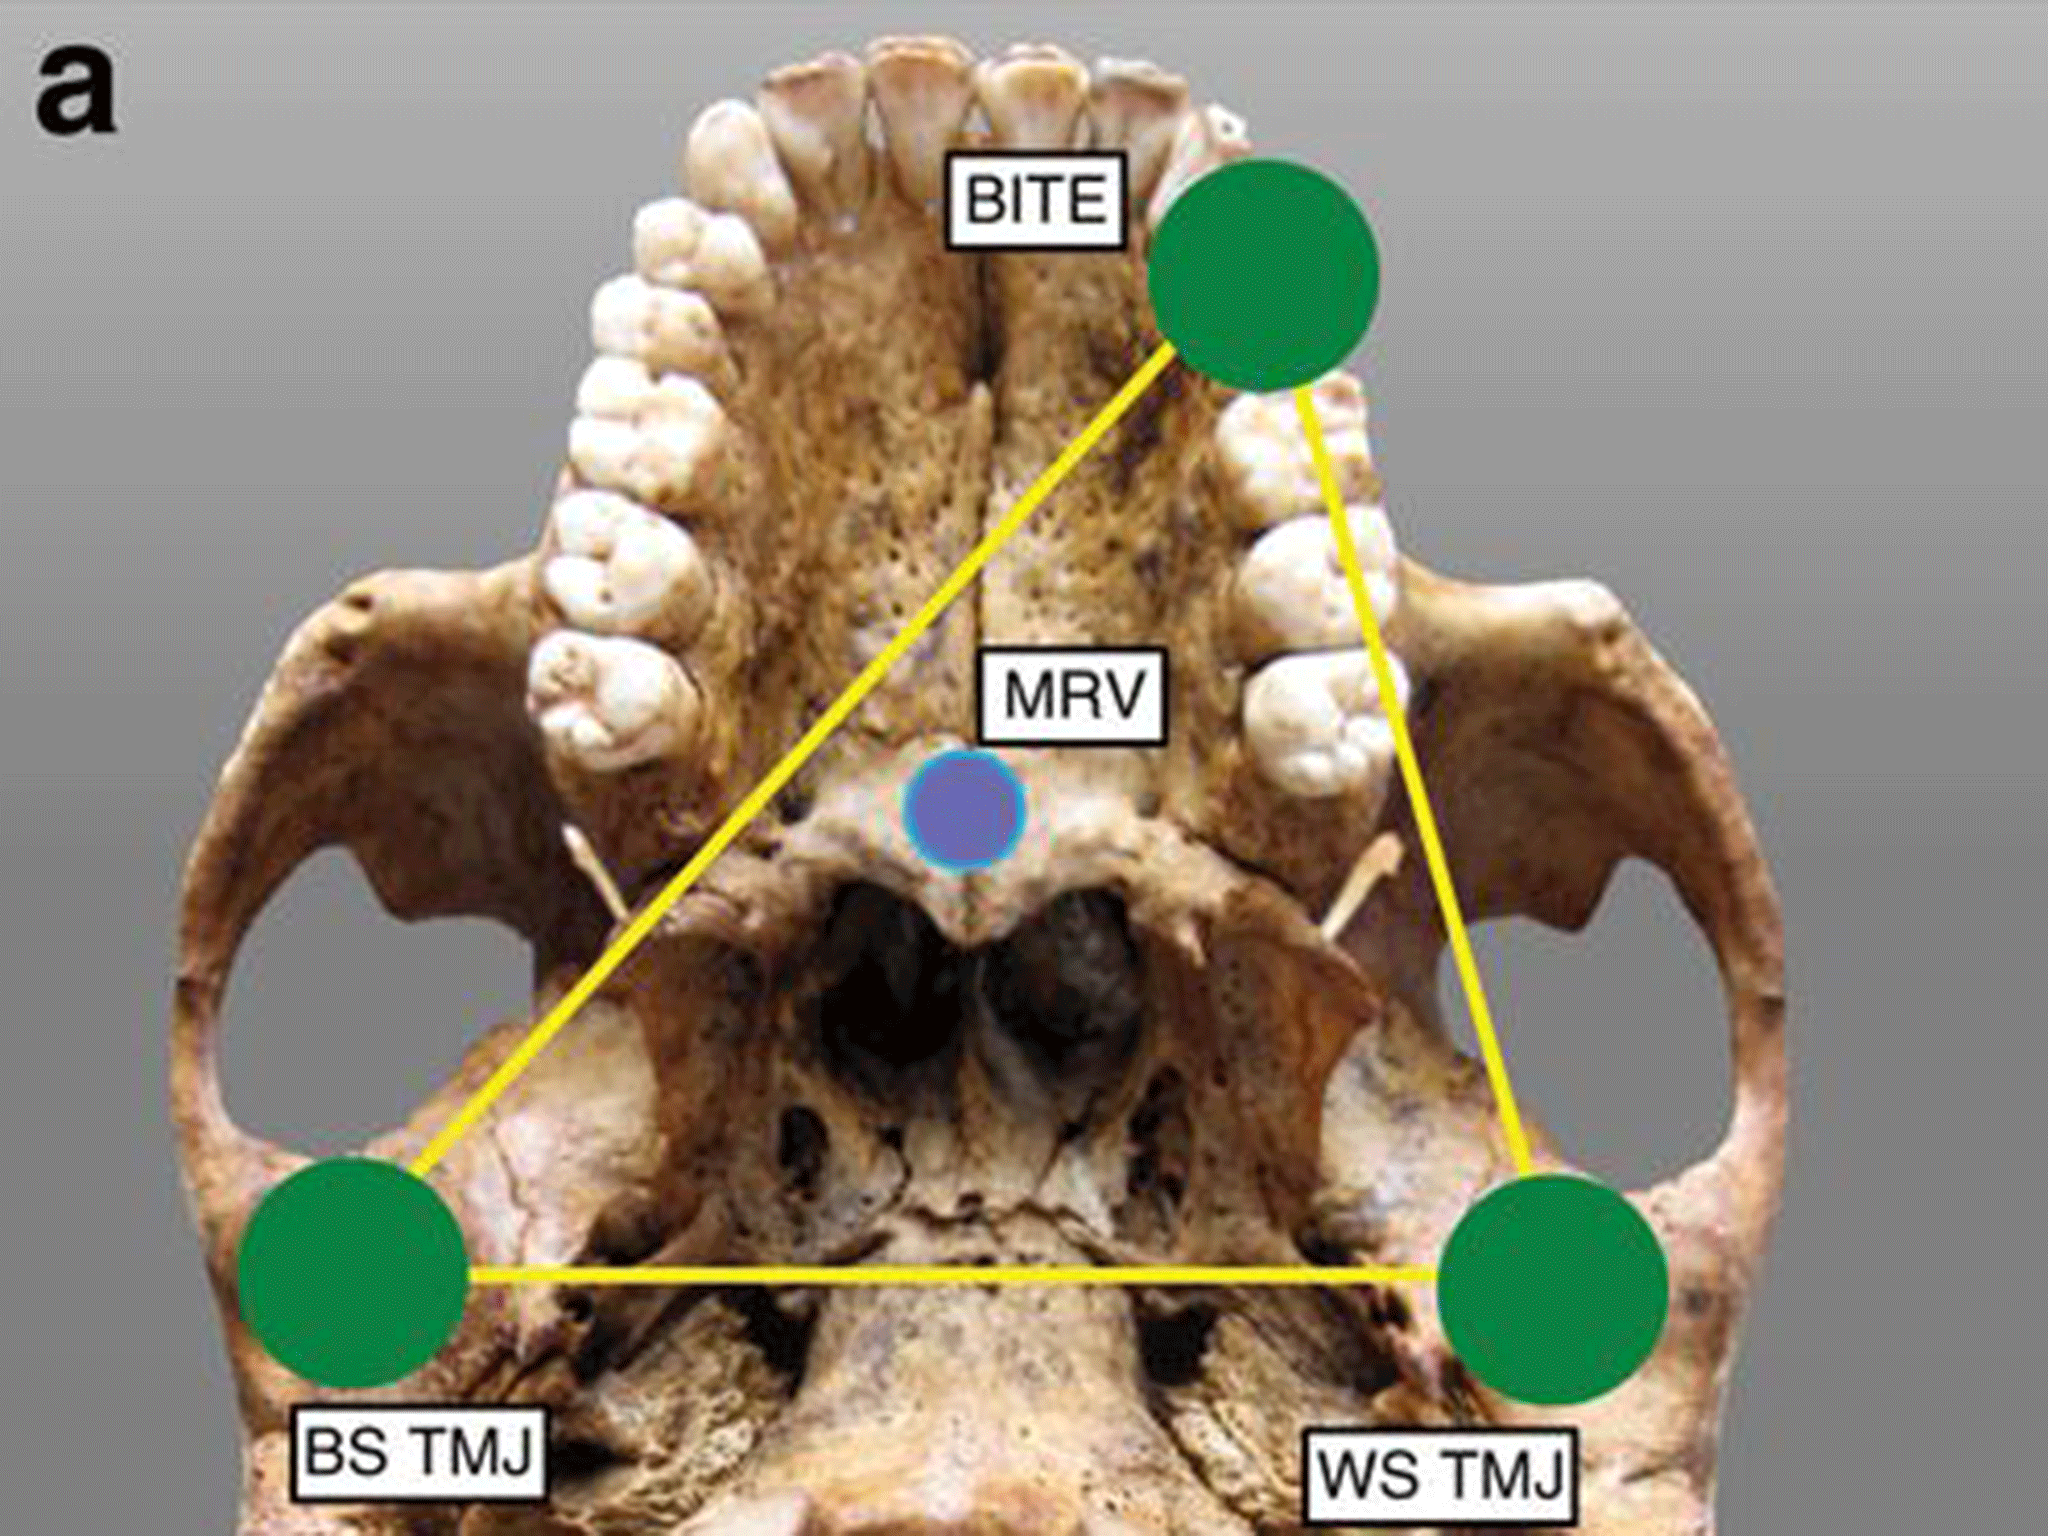 The model of jaw biomechanics used by anthropologists in the study